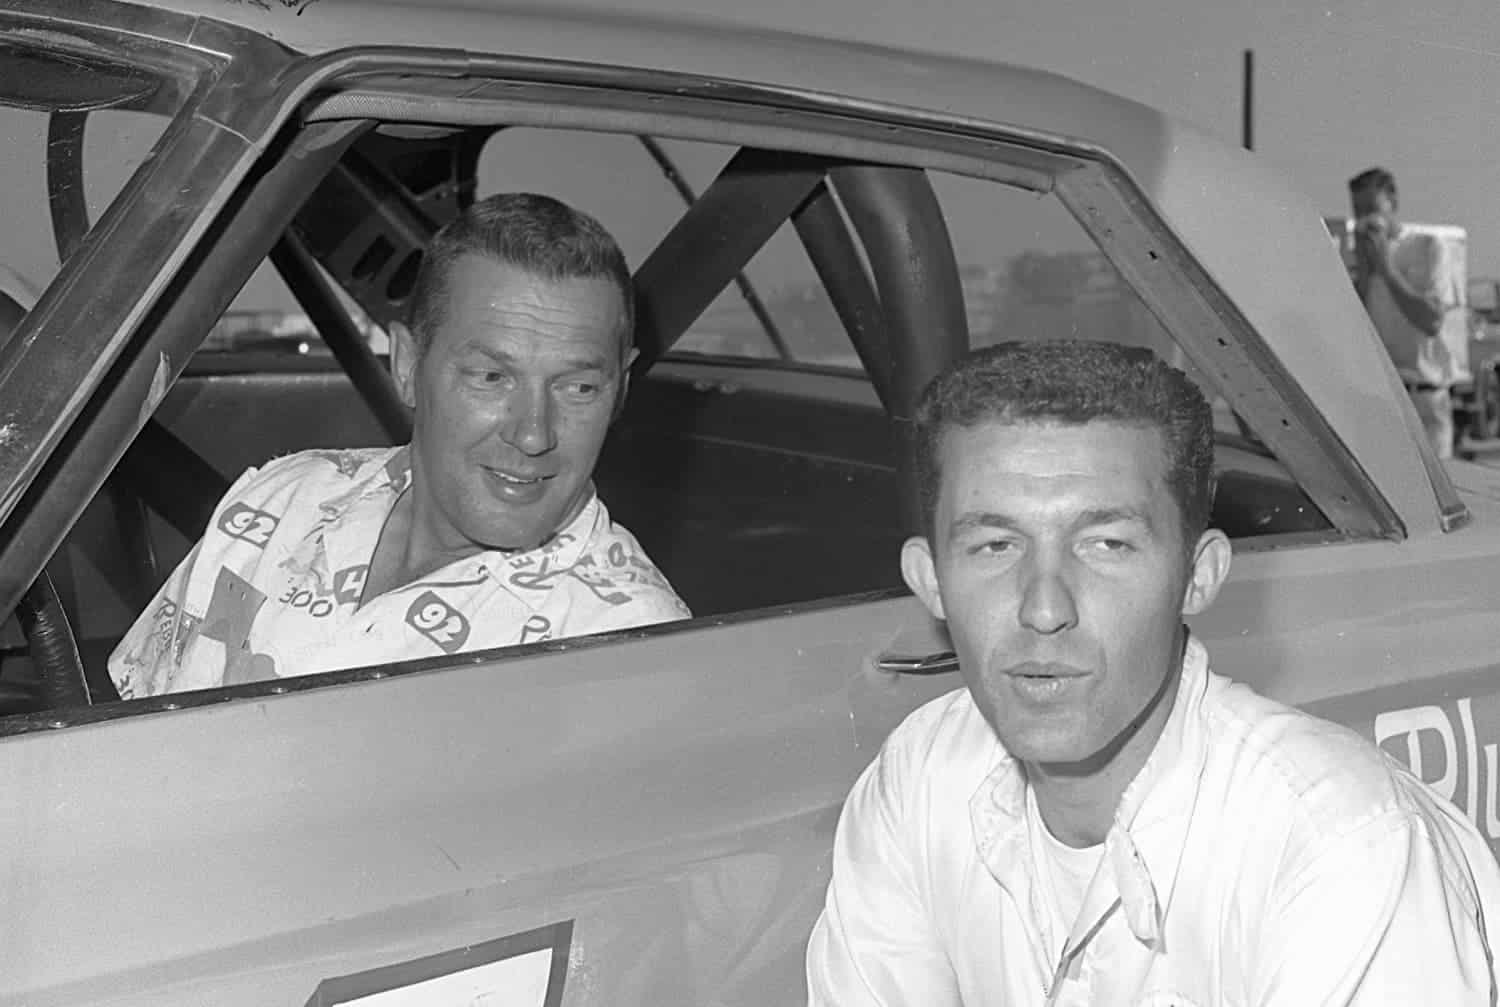 Jim Paschal (in car) and Richard Petty pose for a photo during the 1965 NASCAR season. Petty Enterprises hired Paschal to drive in three races, and he responded by finishing no worse than fifth.|  ISC Images & Archives via Getty Images